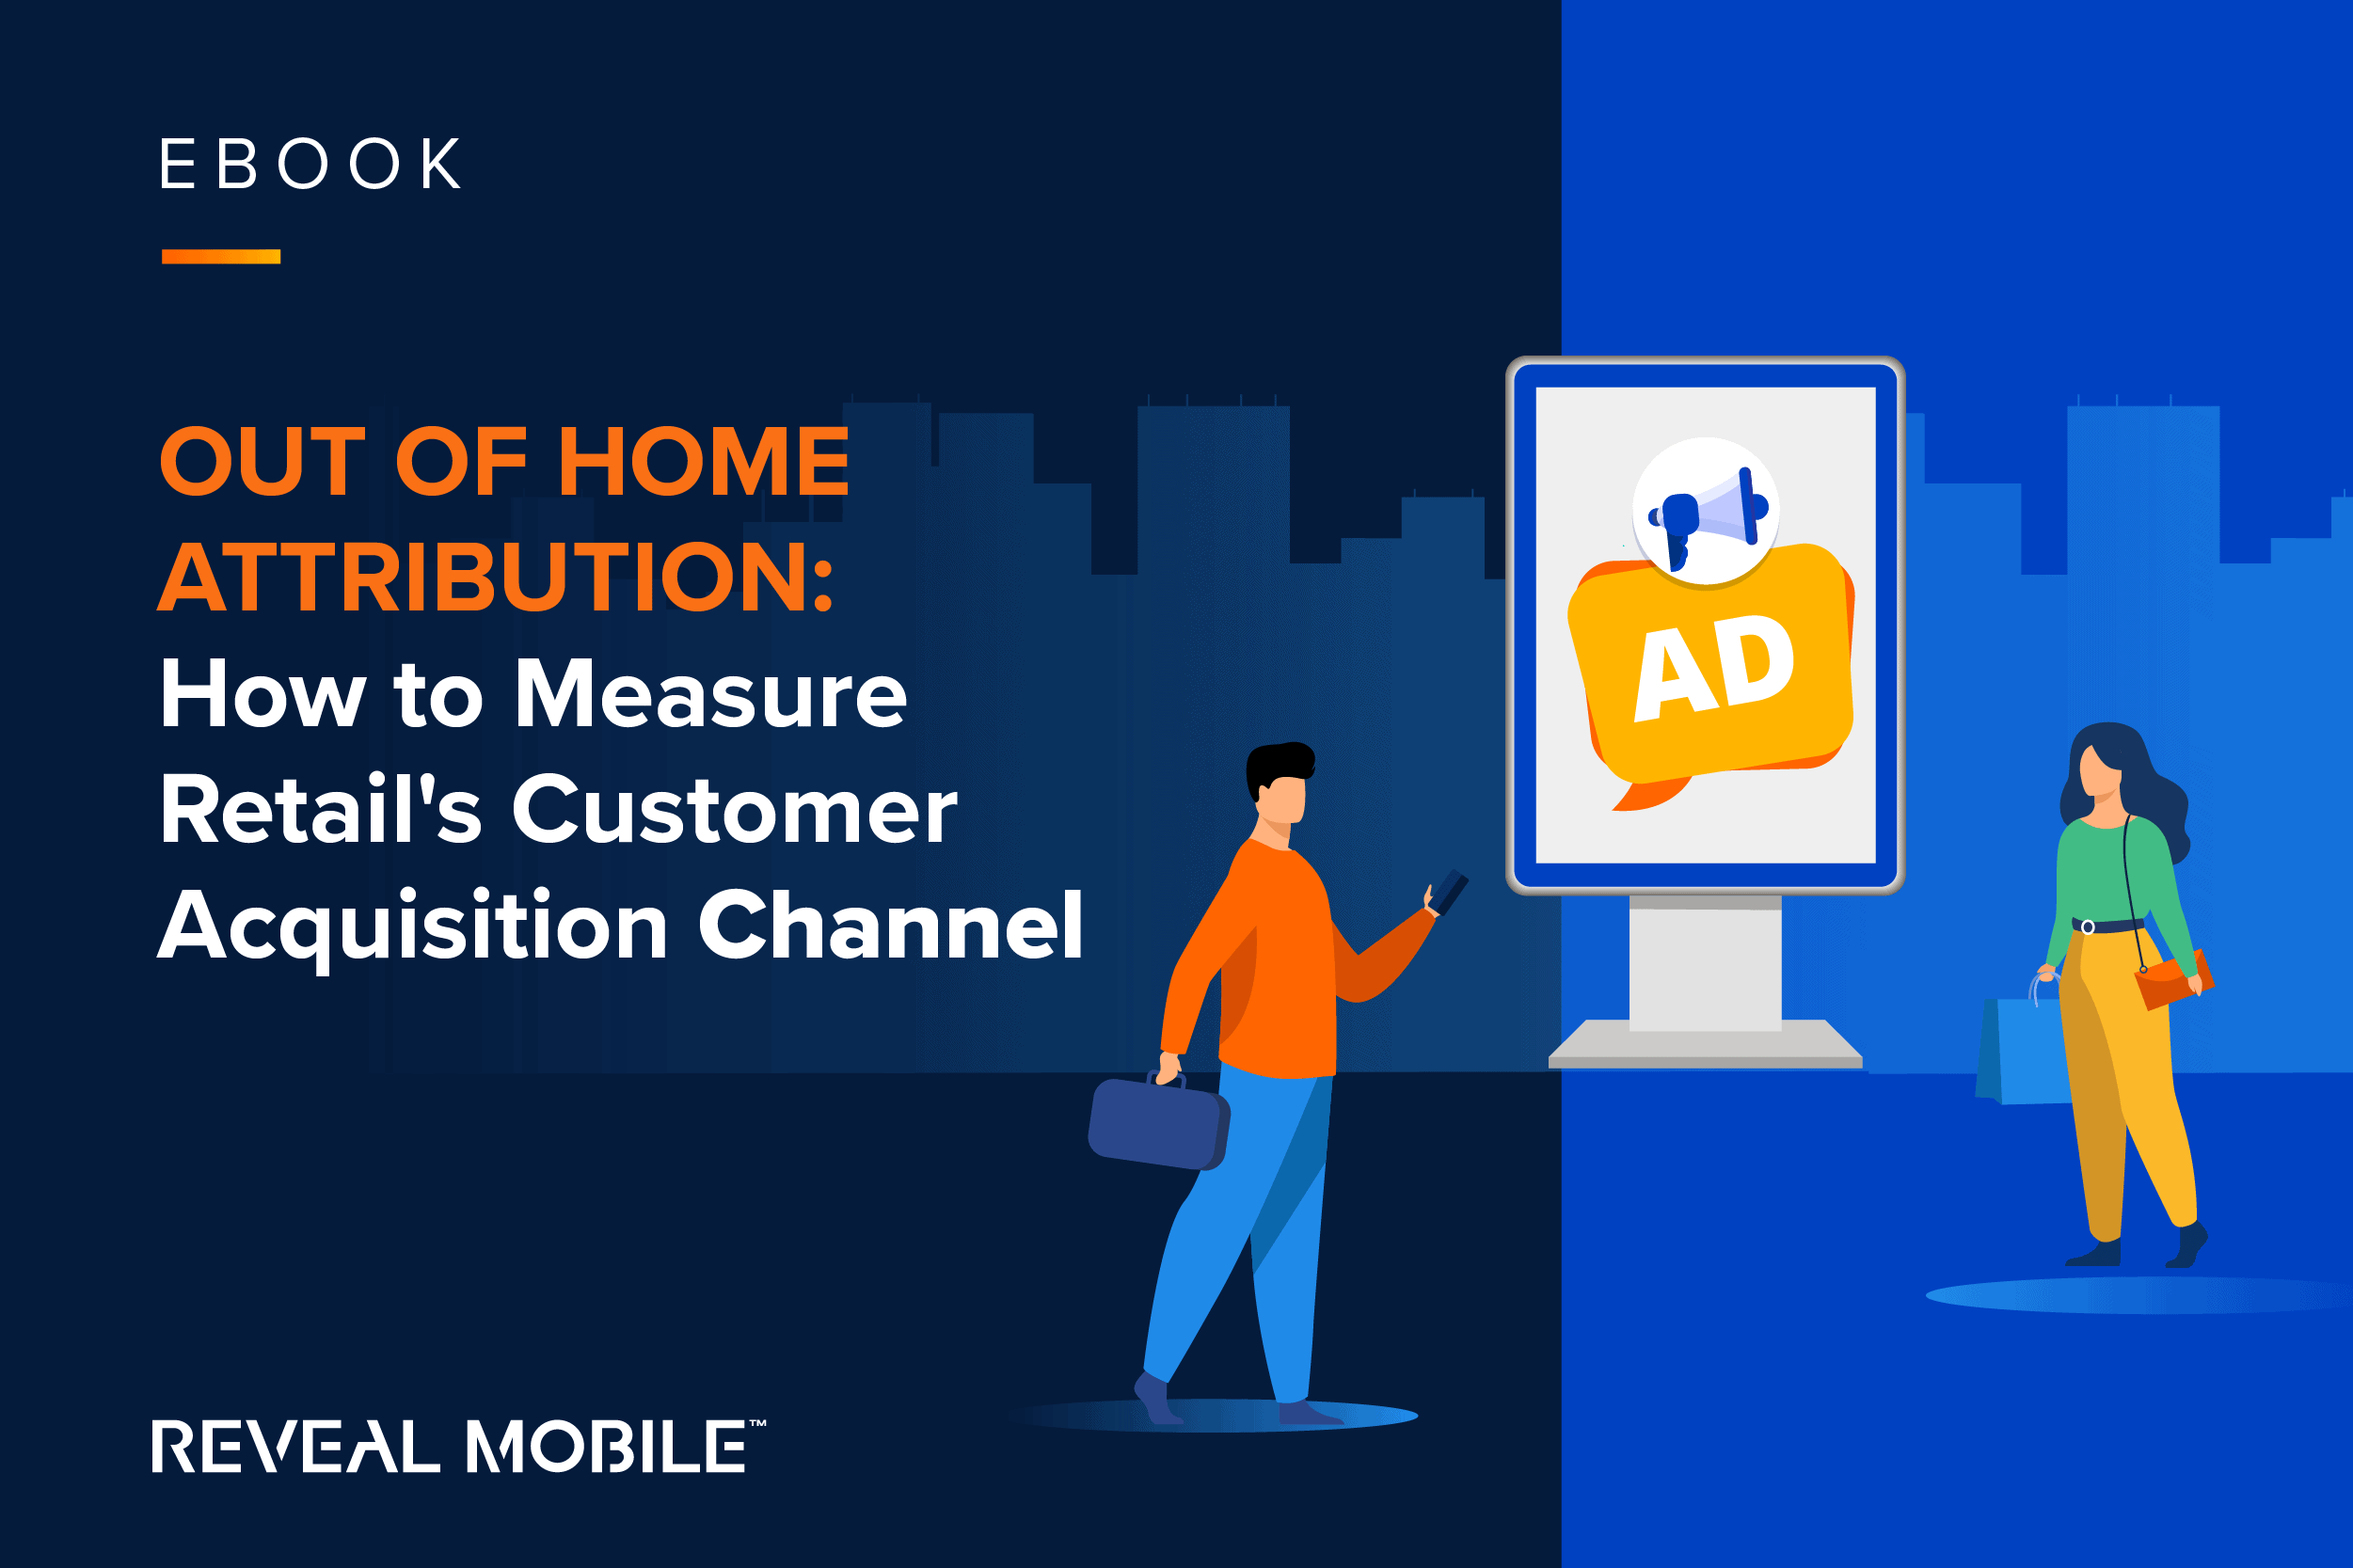 Ebook: Out of home attribution: How to measure retail's customer acquisition channel